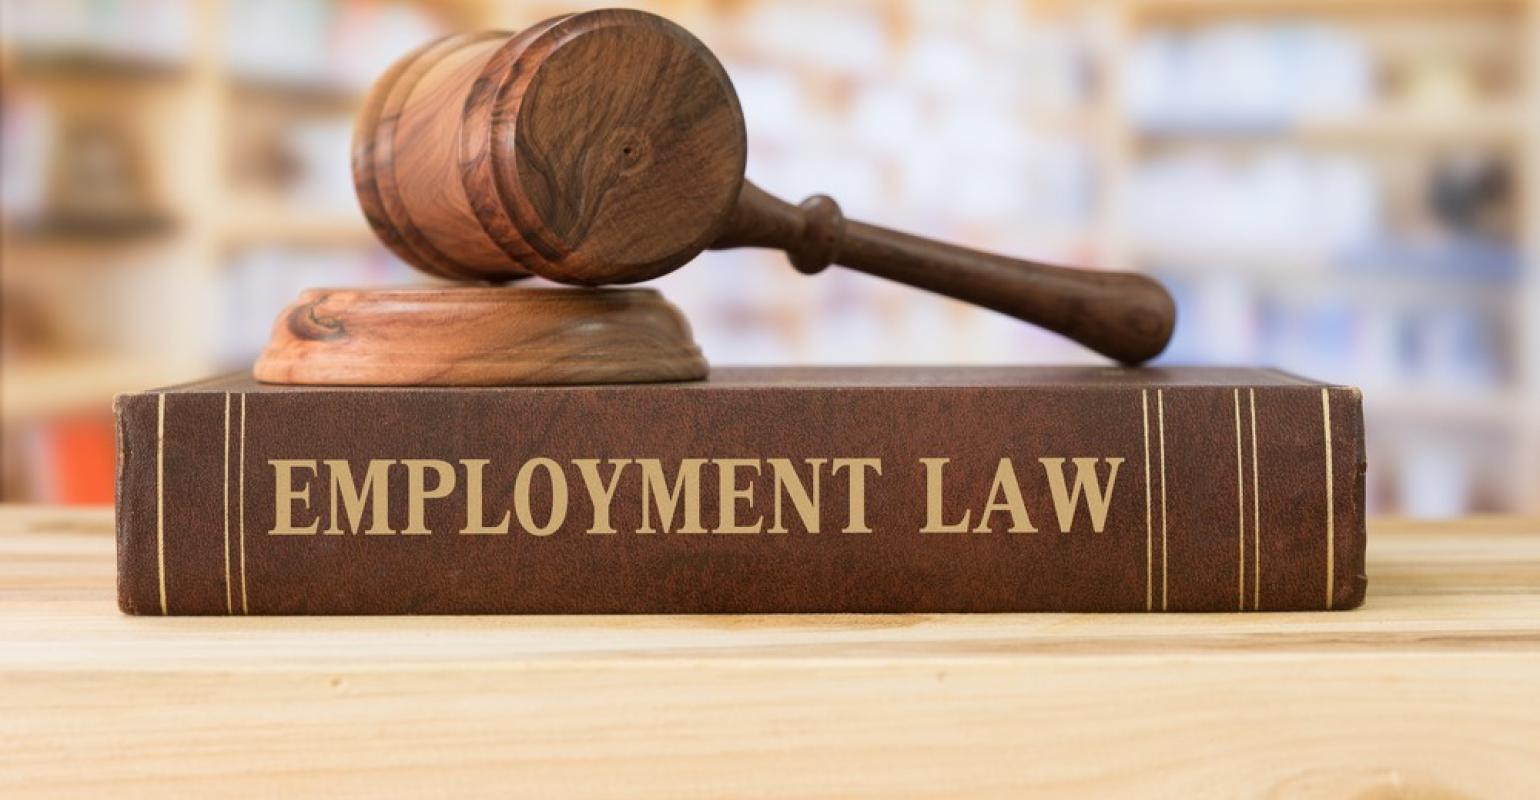 Federal Labor Standards Make the Baseline of Employments Law